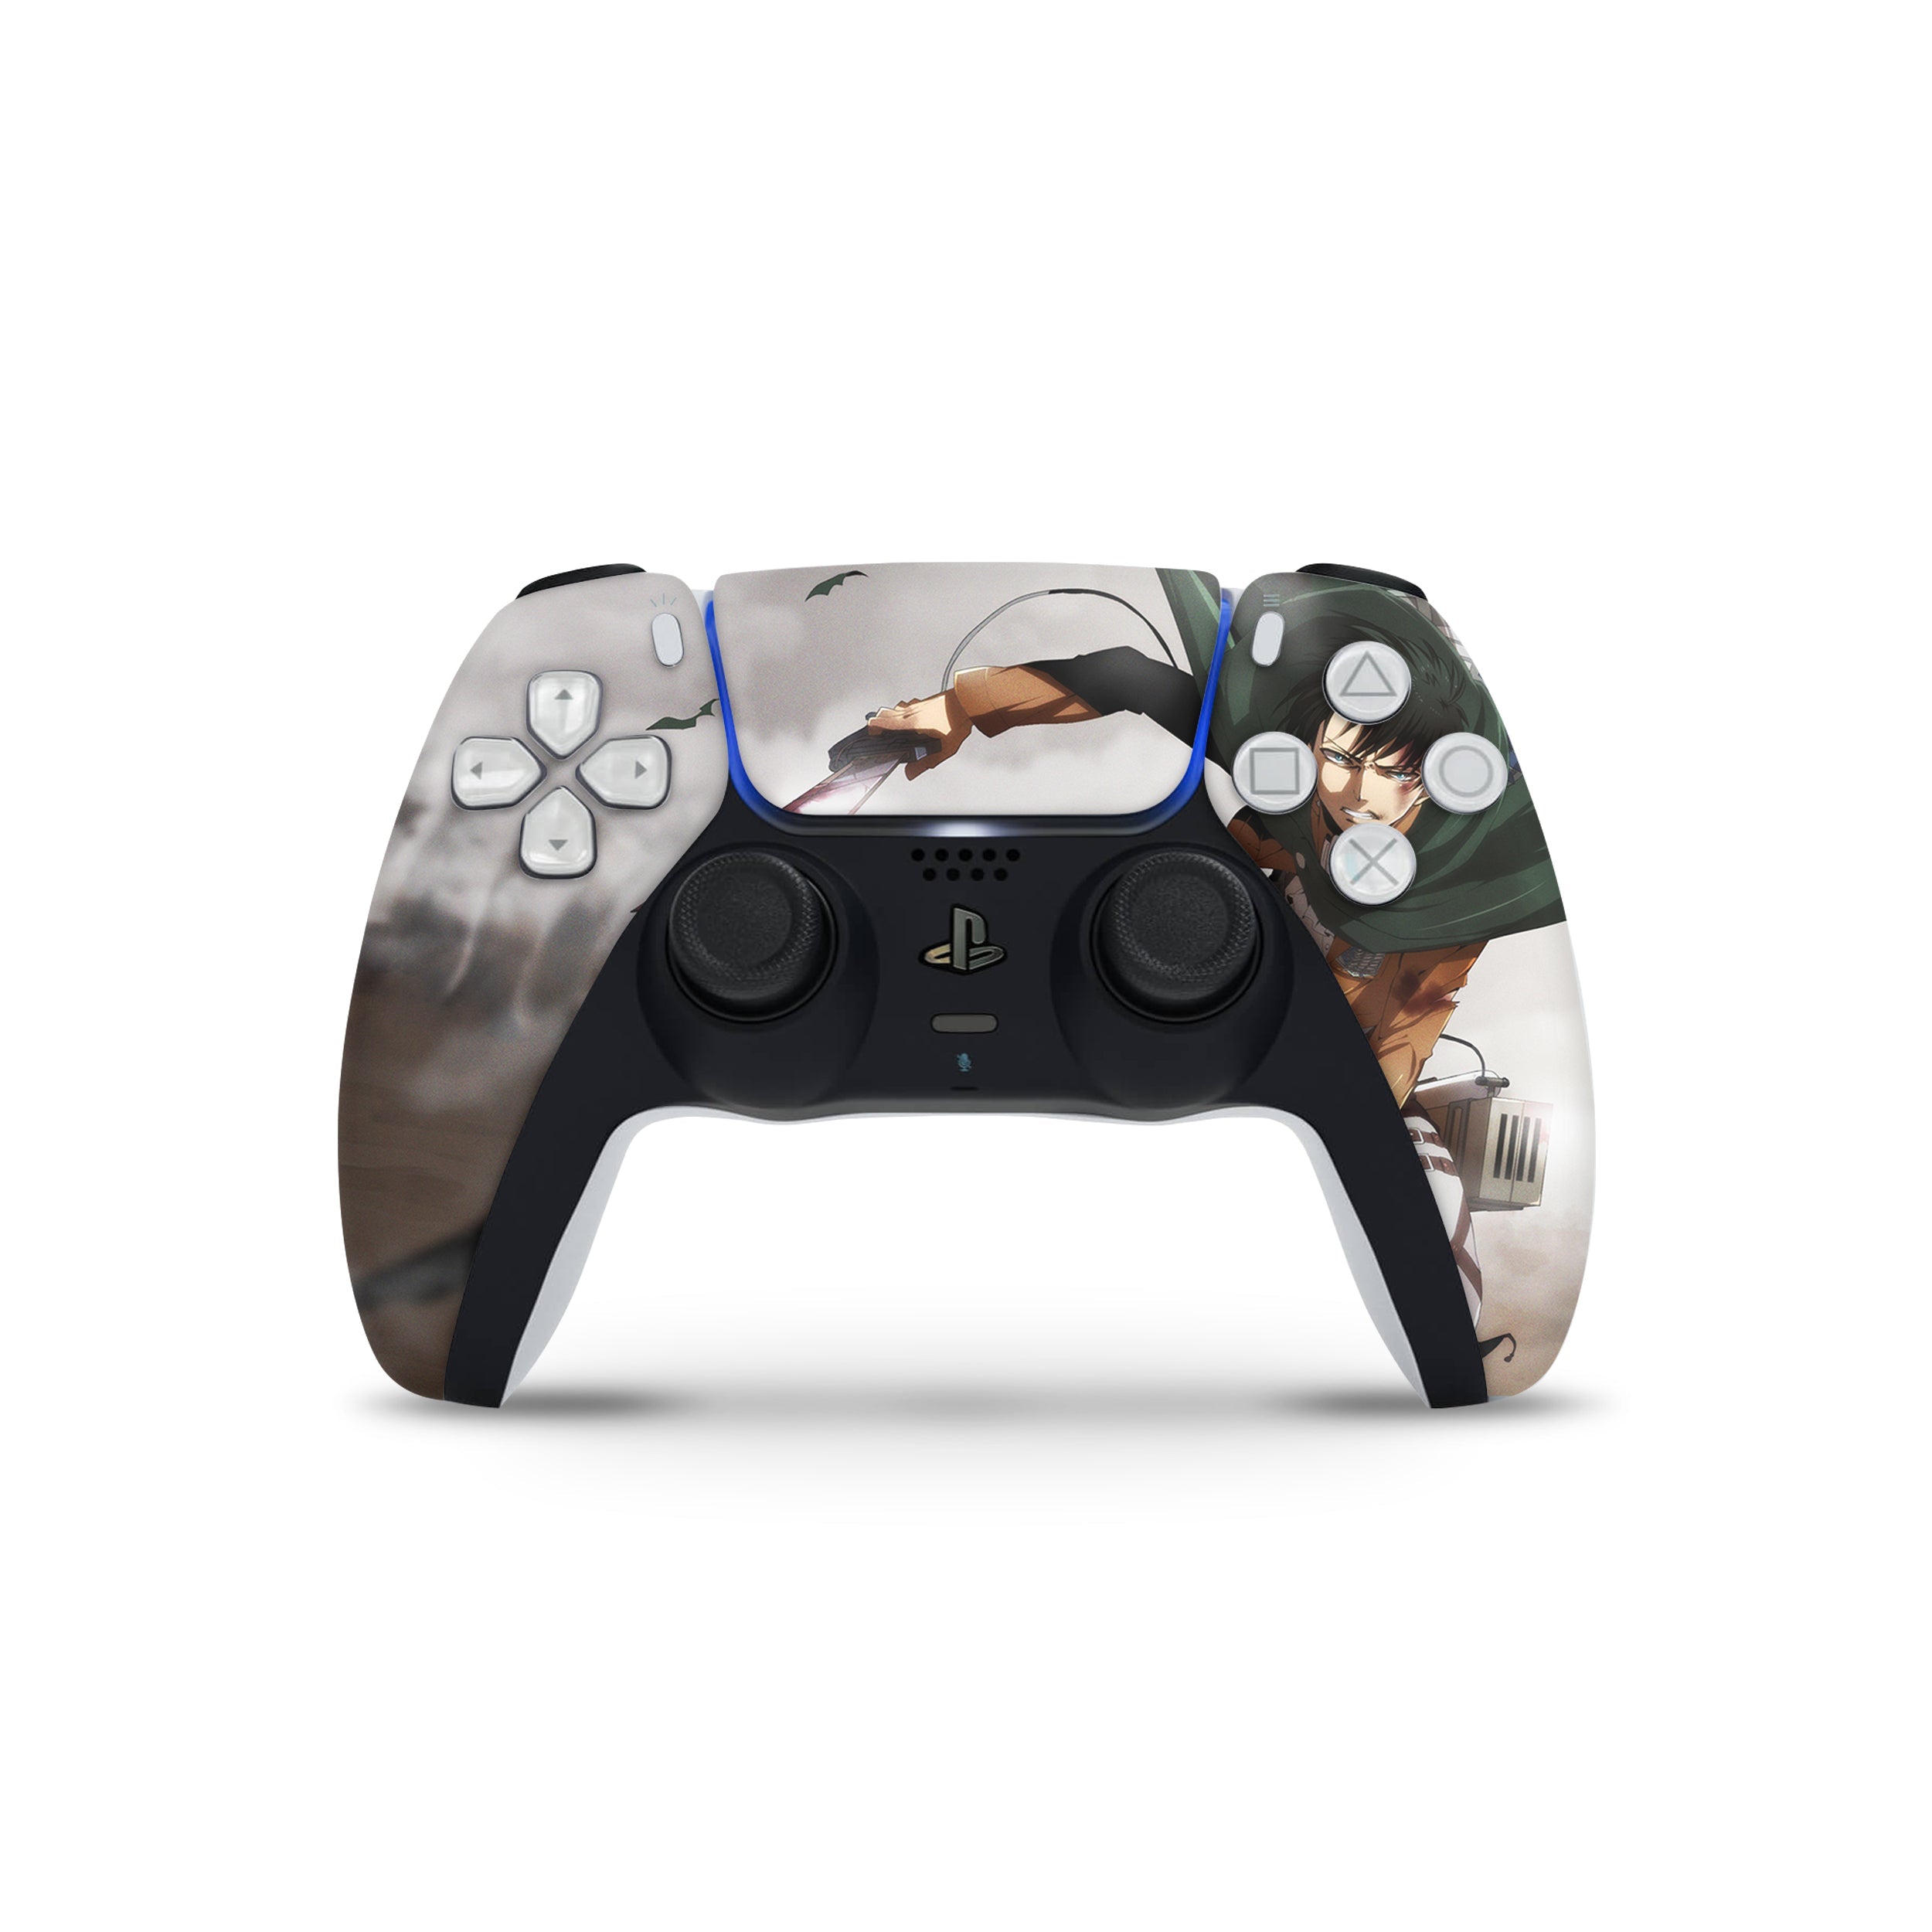 A video game skin featuring a Attack On Titan Levi Ackerman design for the PS5 DualSense Controller.